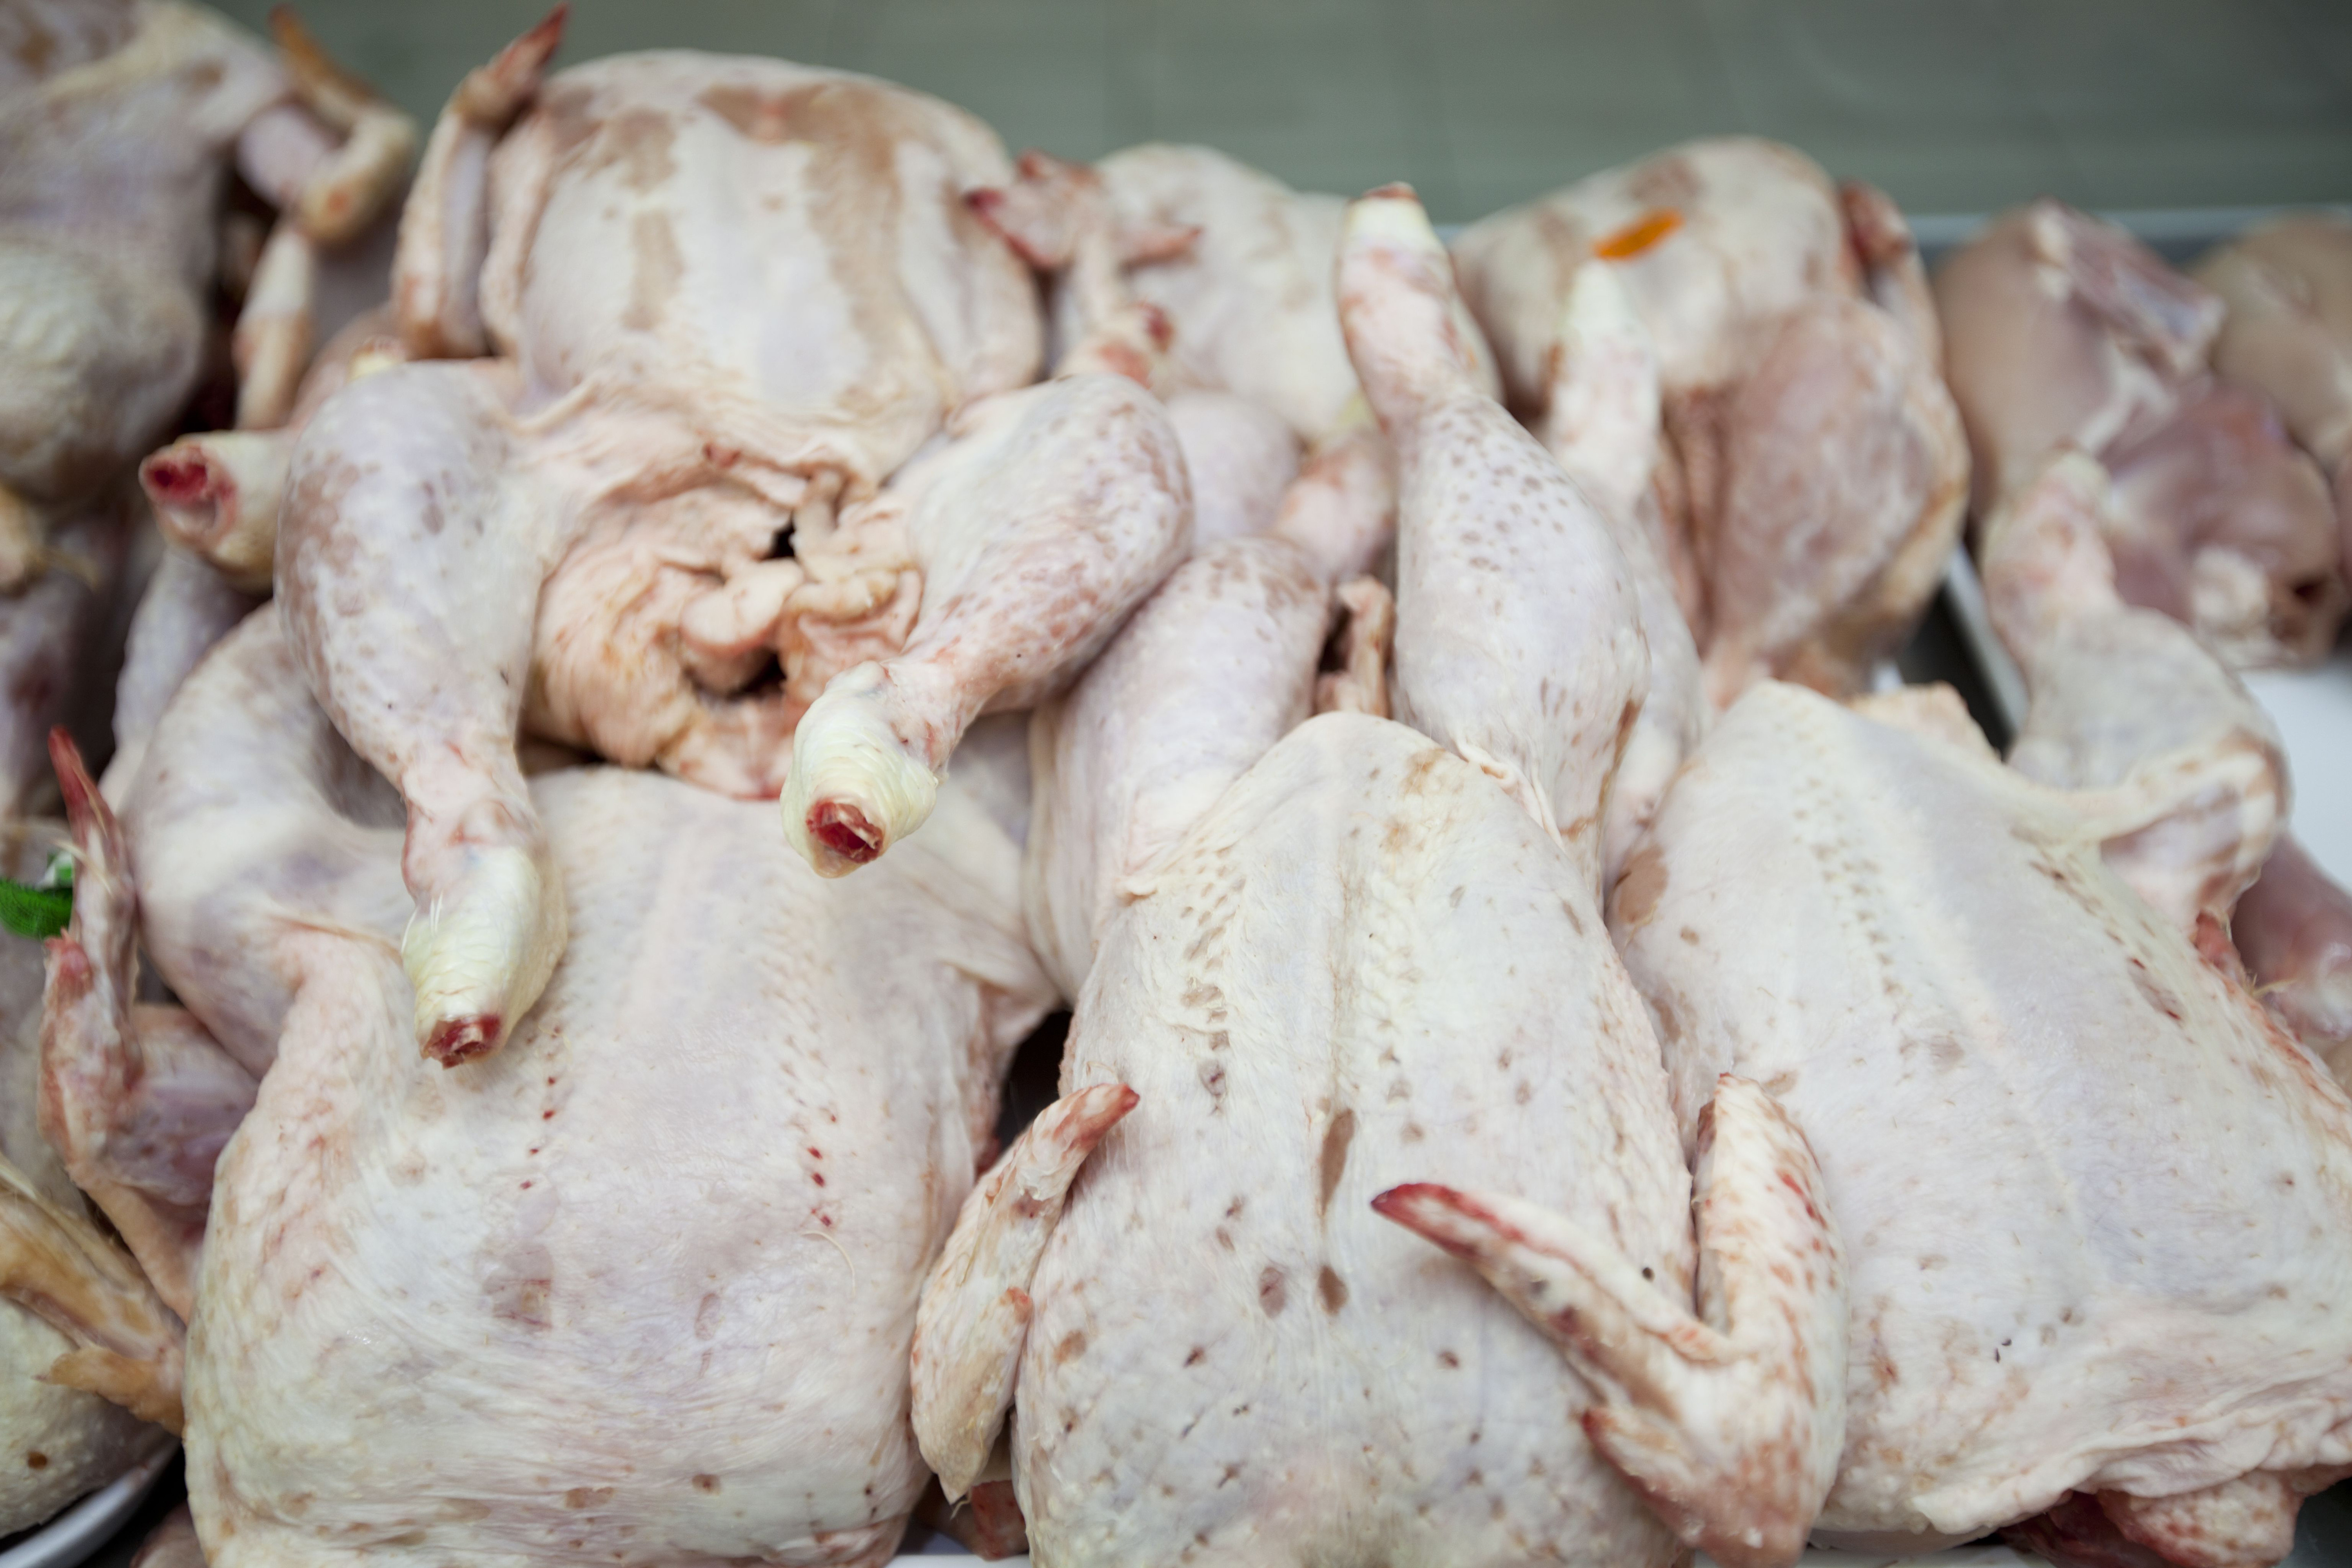 The work was undertaken at the University of Liverpool. Paul Wigley, of the university’s Institute of Infection and Global Health, said: "It&apos;s likely to be very challenging to produce a protective immune response in broiler chickens before slaughter age, which is around 6 weeks of age." Photo: Mood Board/Rex/Shutterstock